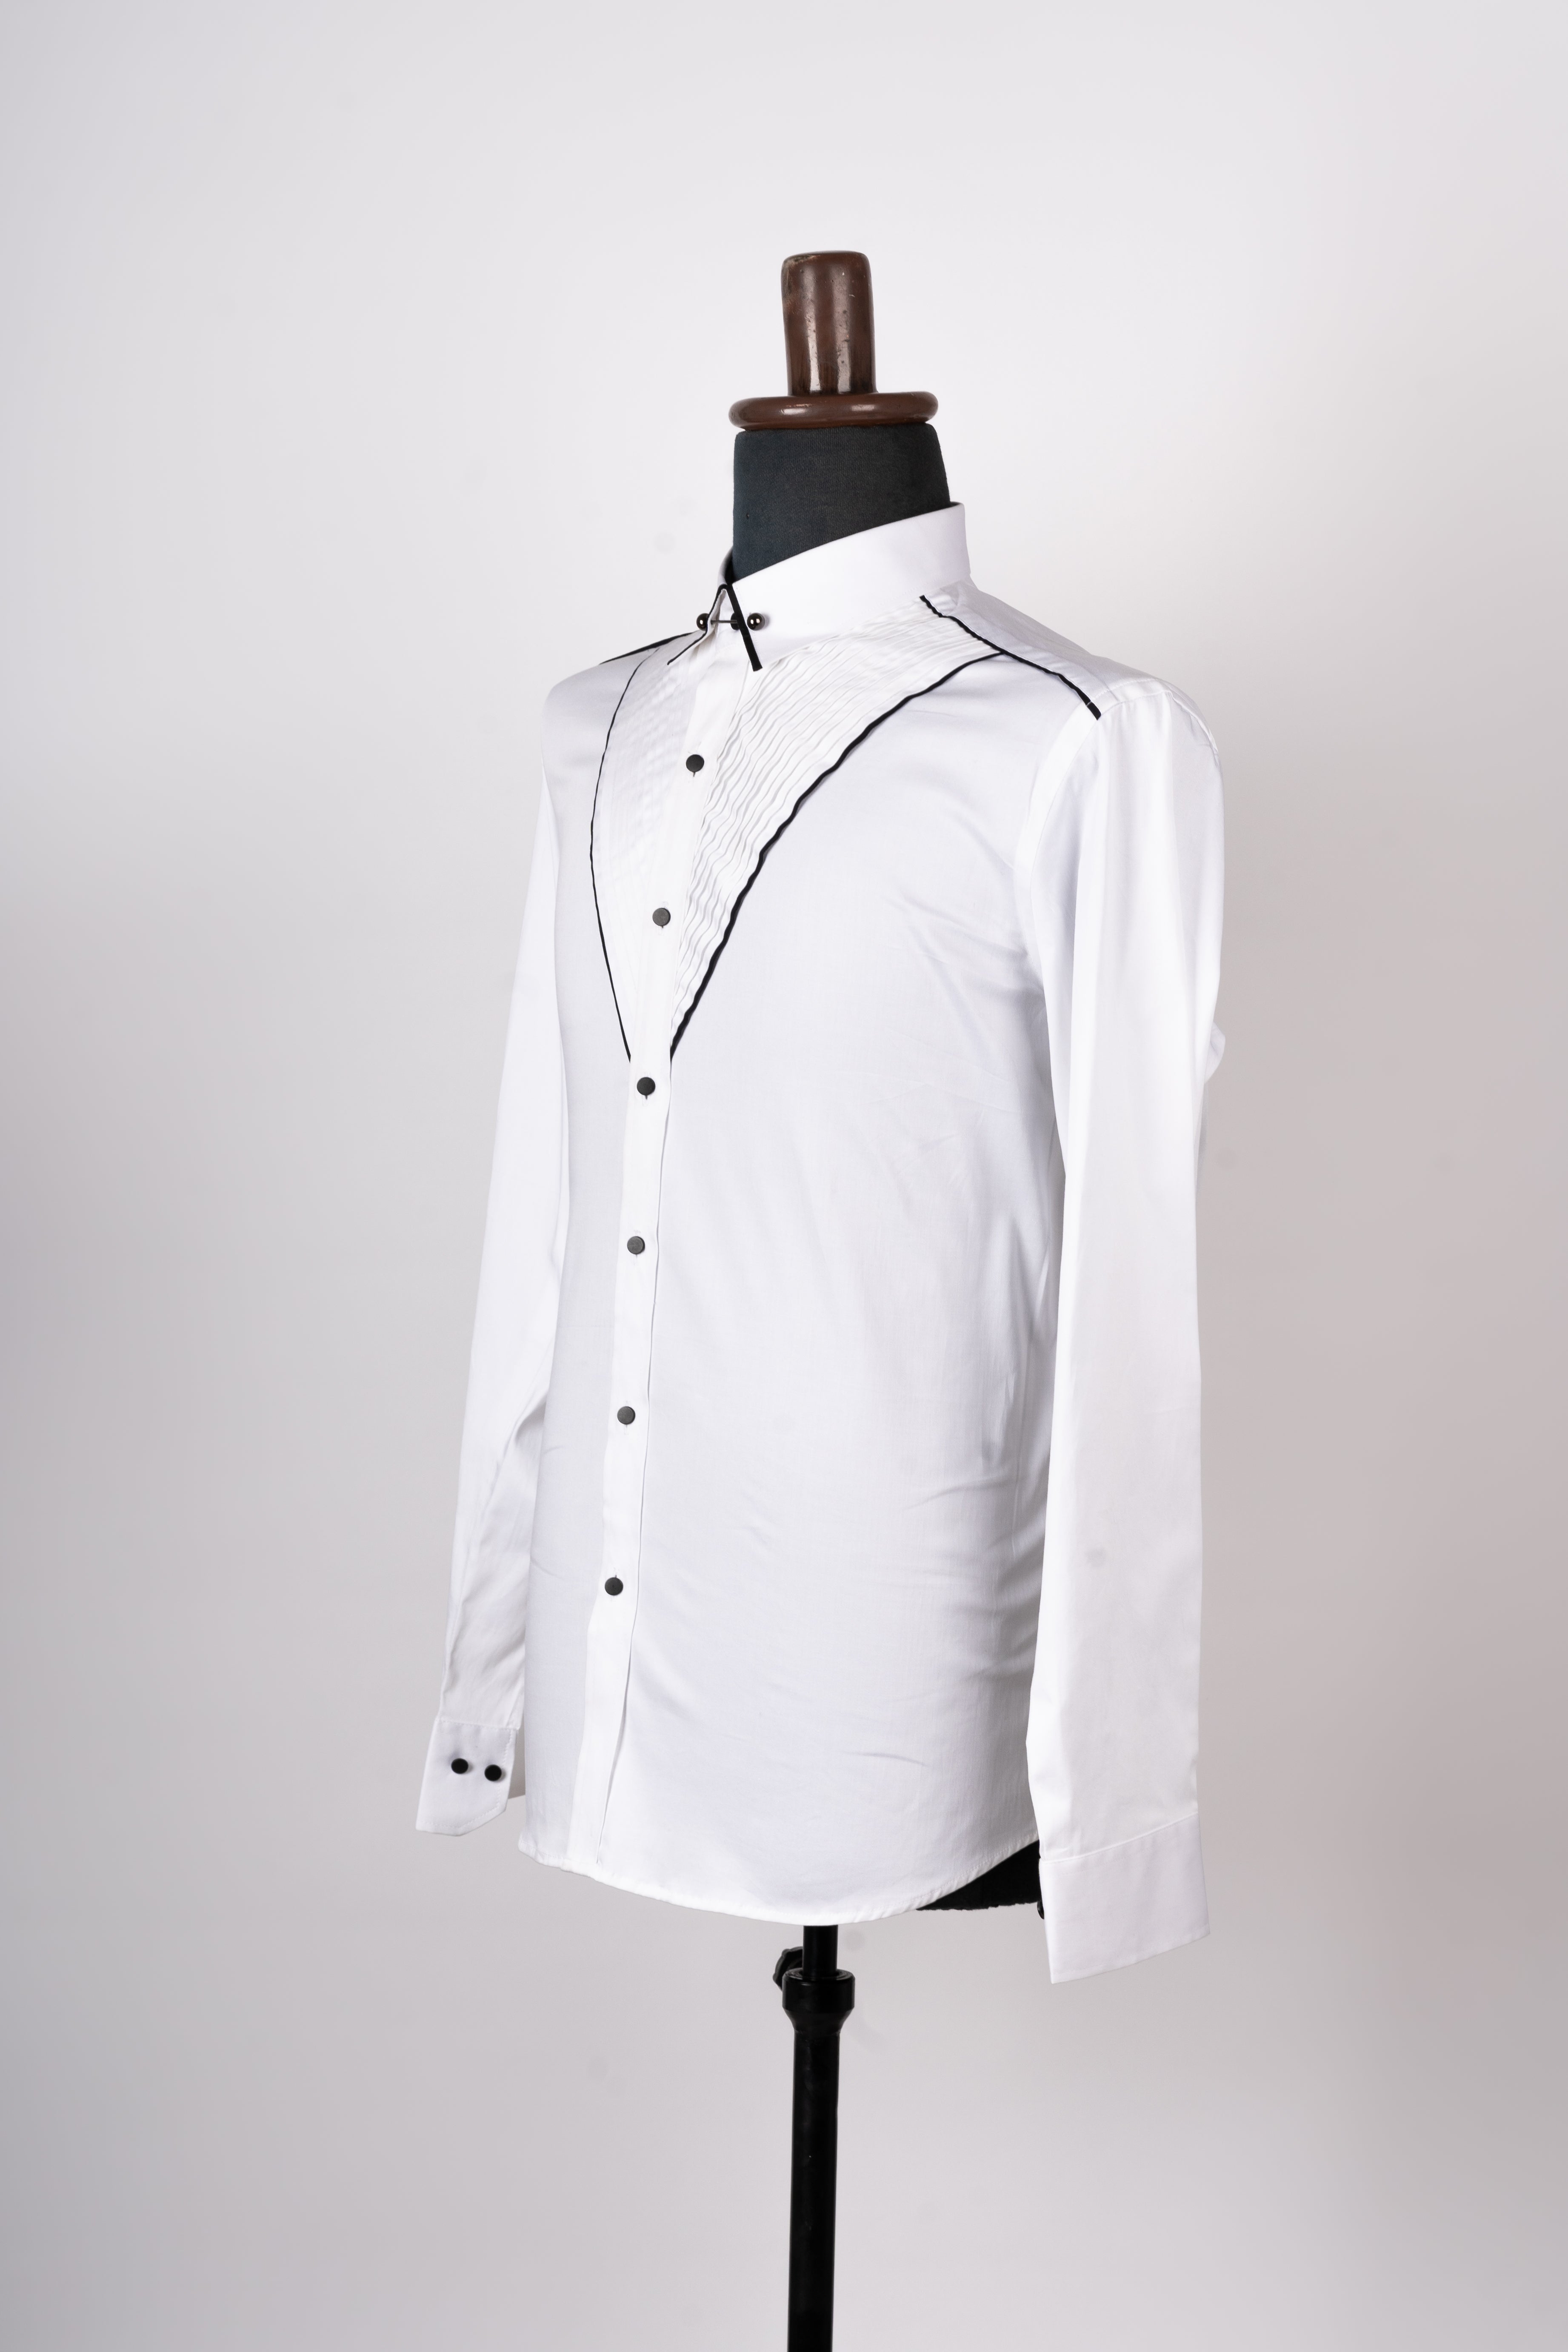 White vertical pleated shirt with regular formal collar and black buttons